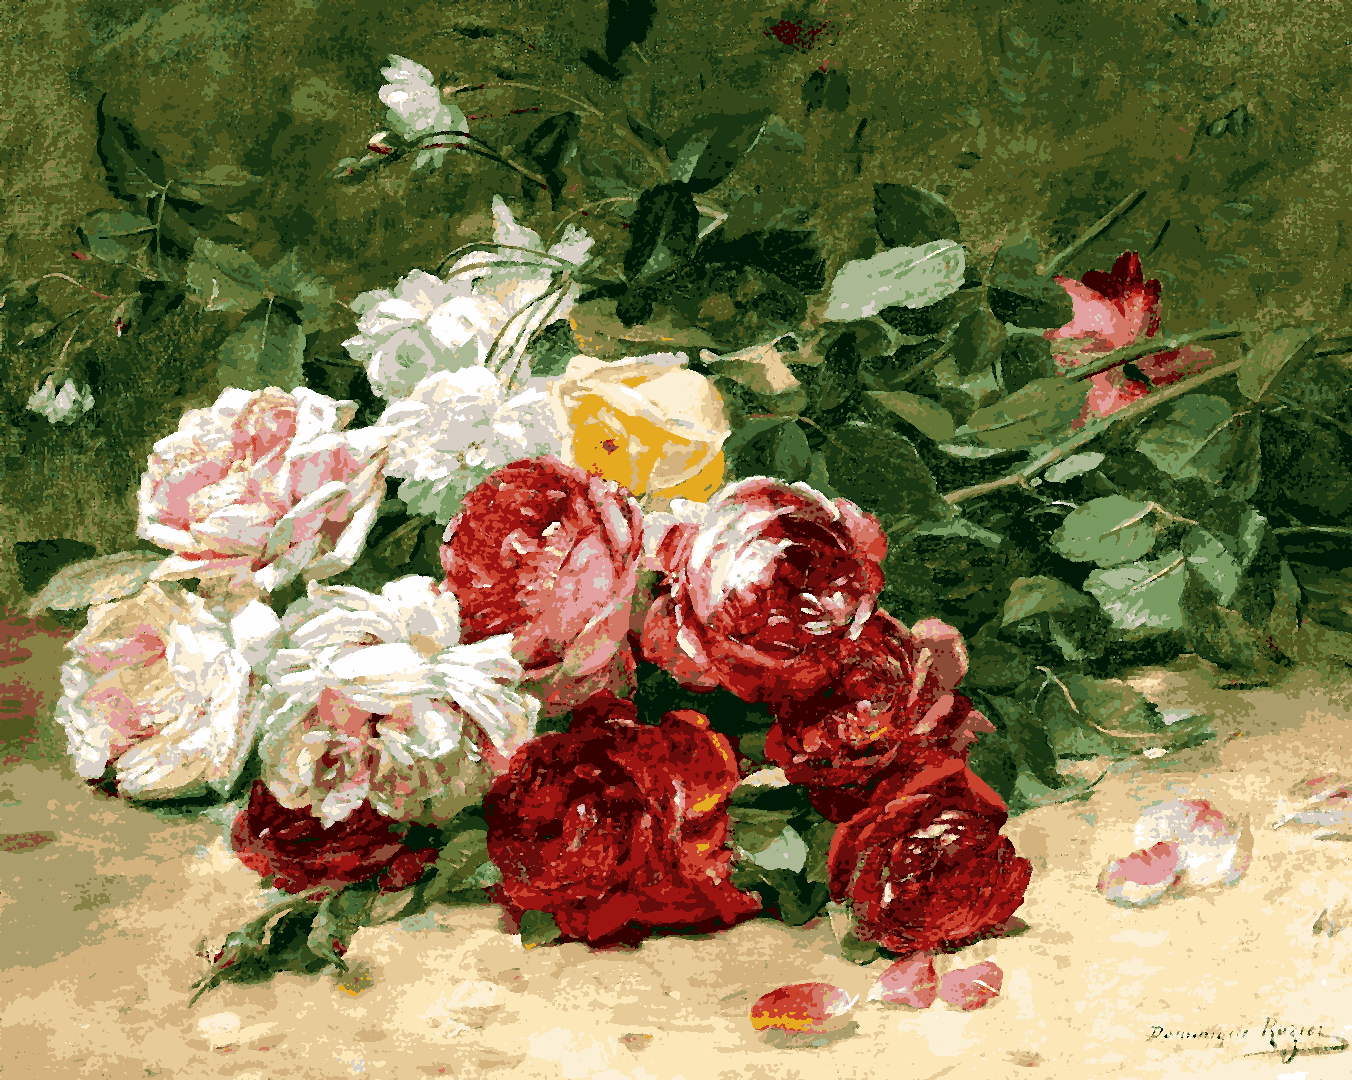 Still Life with Roses by Dominique Hubert Rozier - Van-Go Paint-By-Number Kit